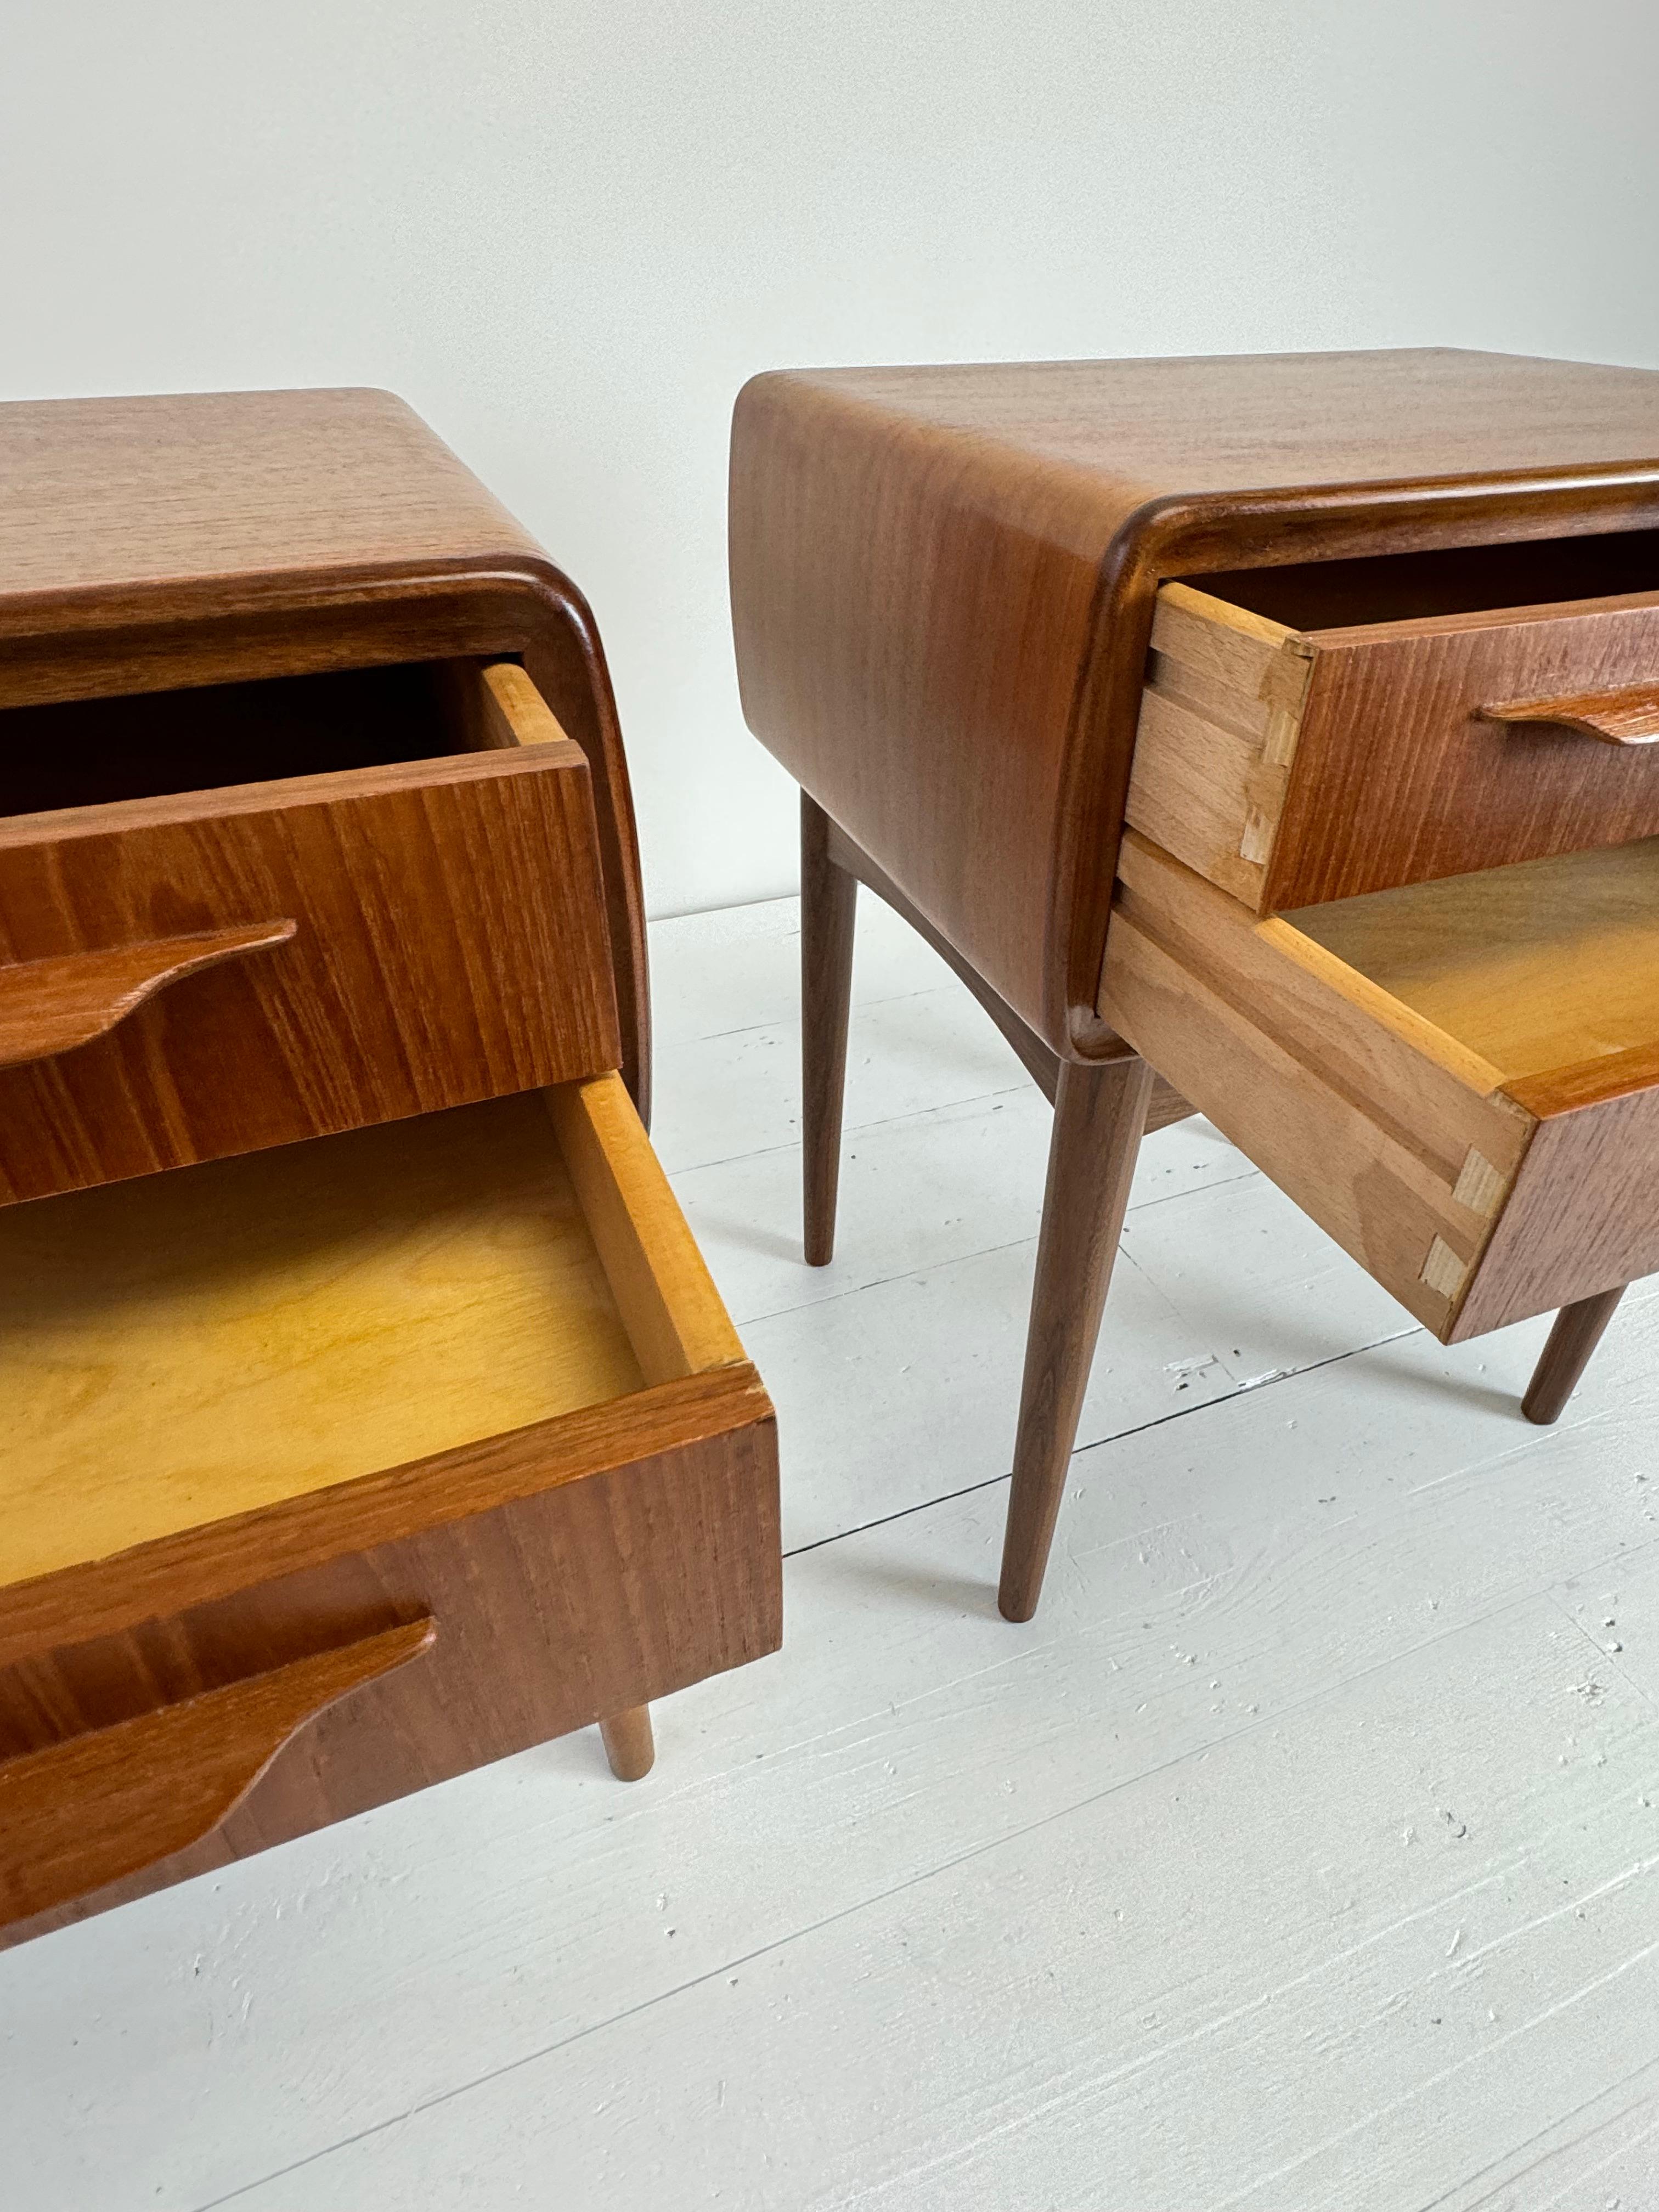 Mid-20th Century A Pair of Teak Night Stands by Johaness Andersen c.1960's For Sale